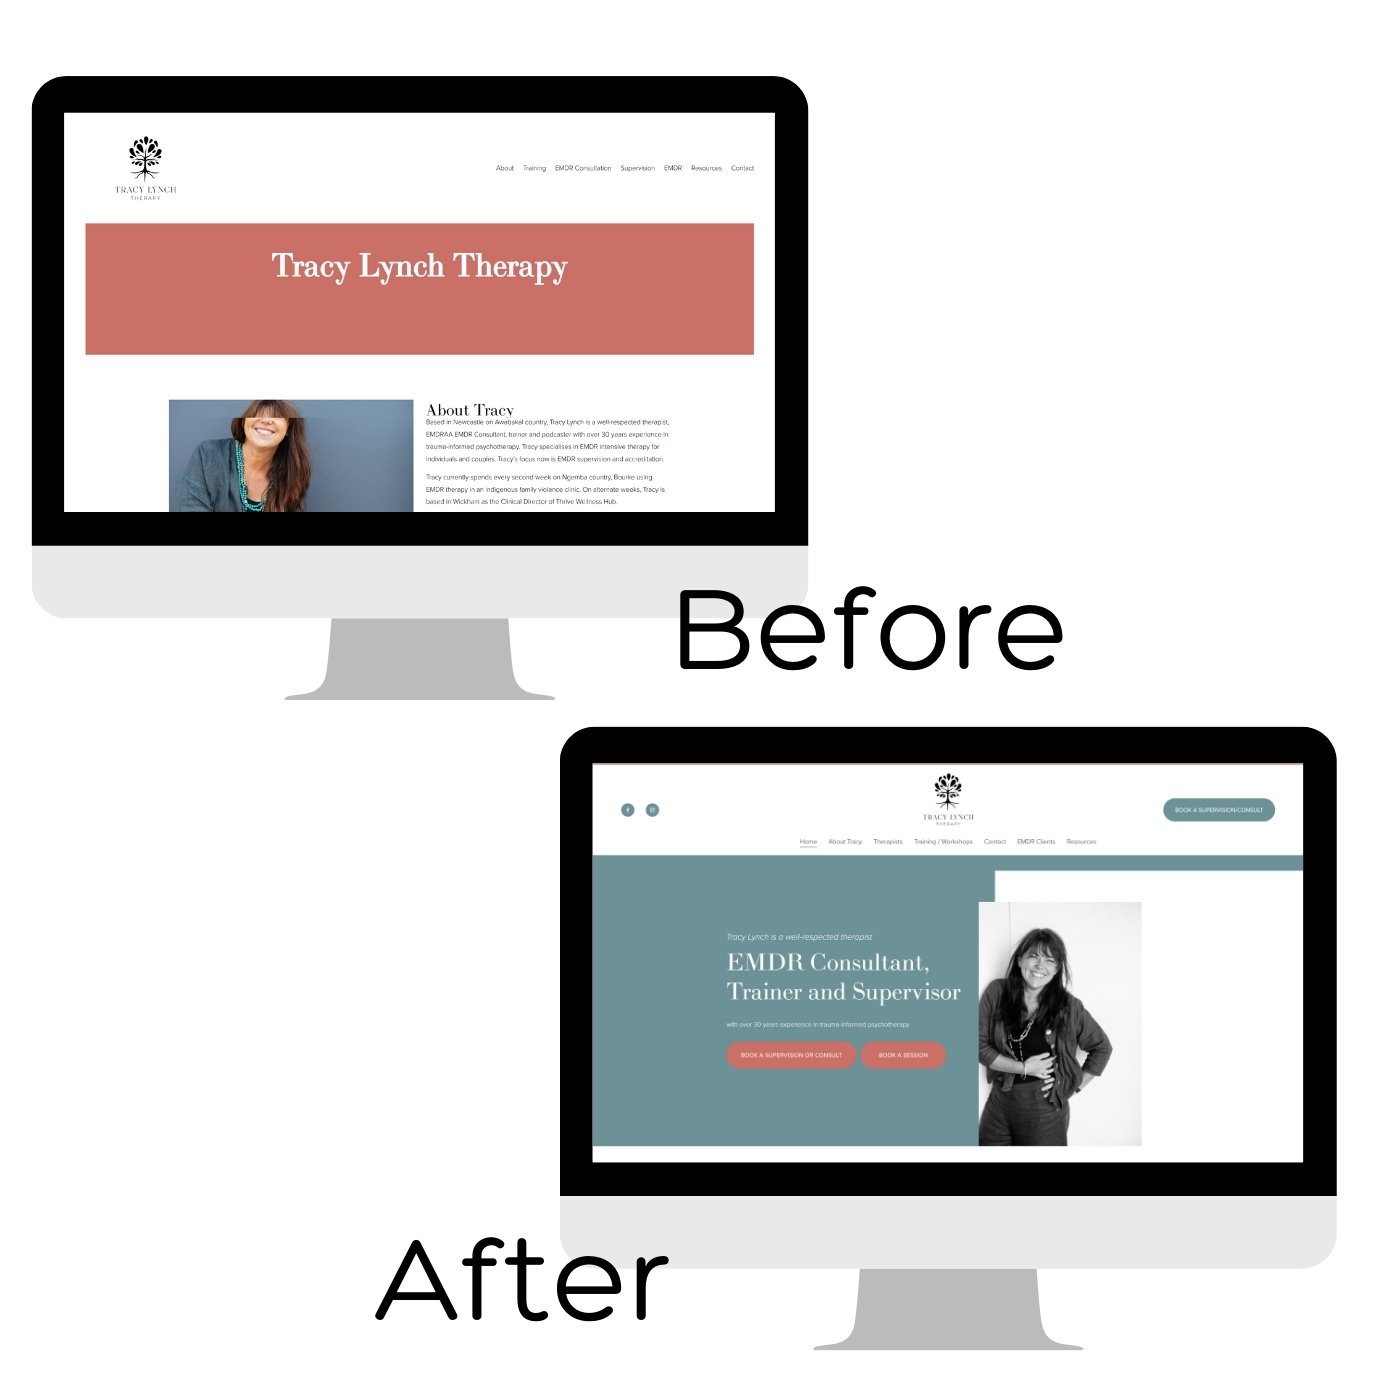 tracy lynch before and after website design.jpg